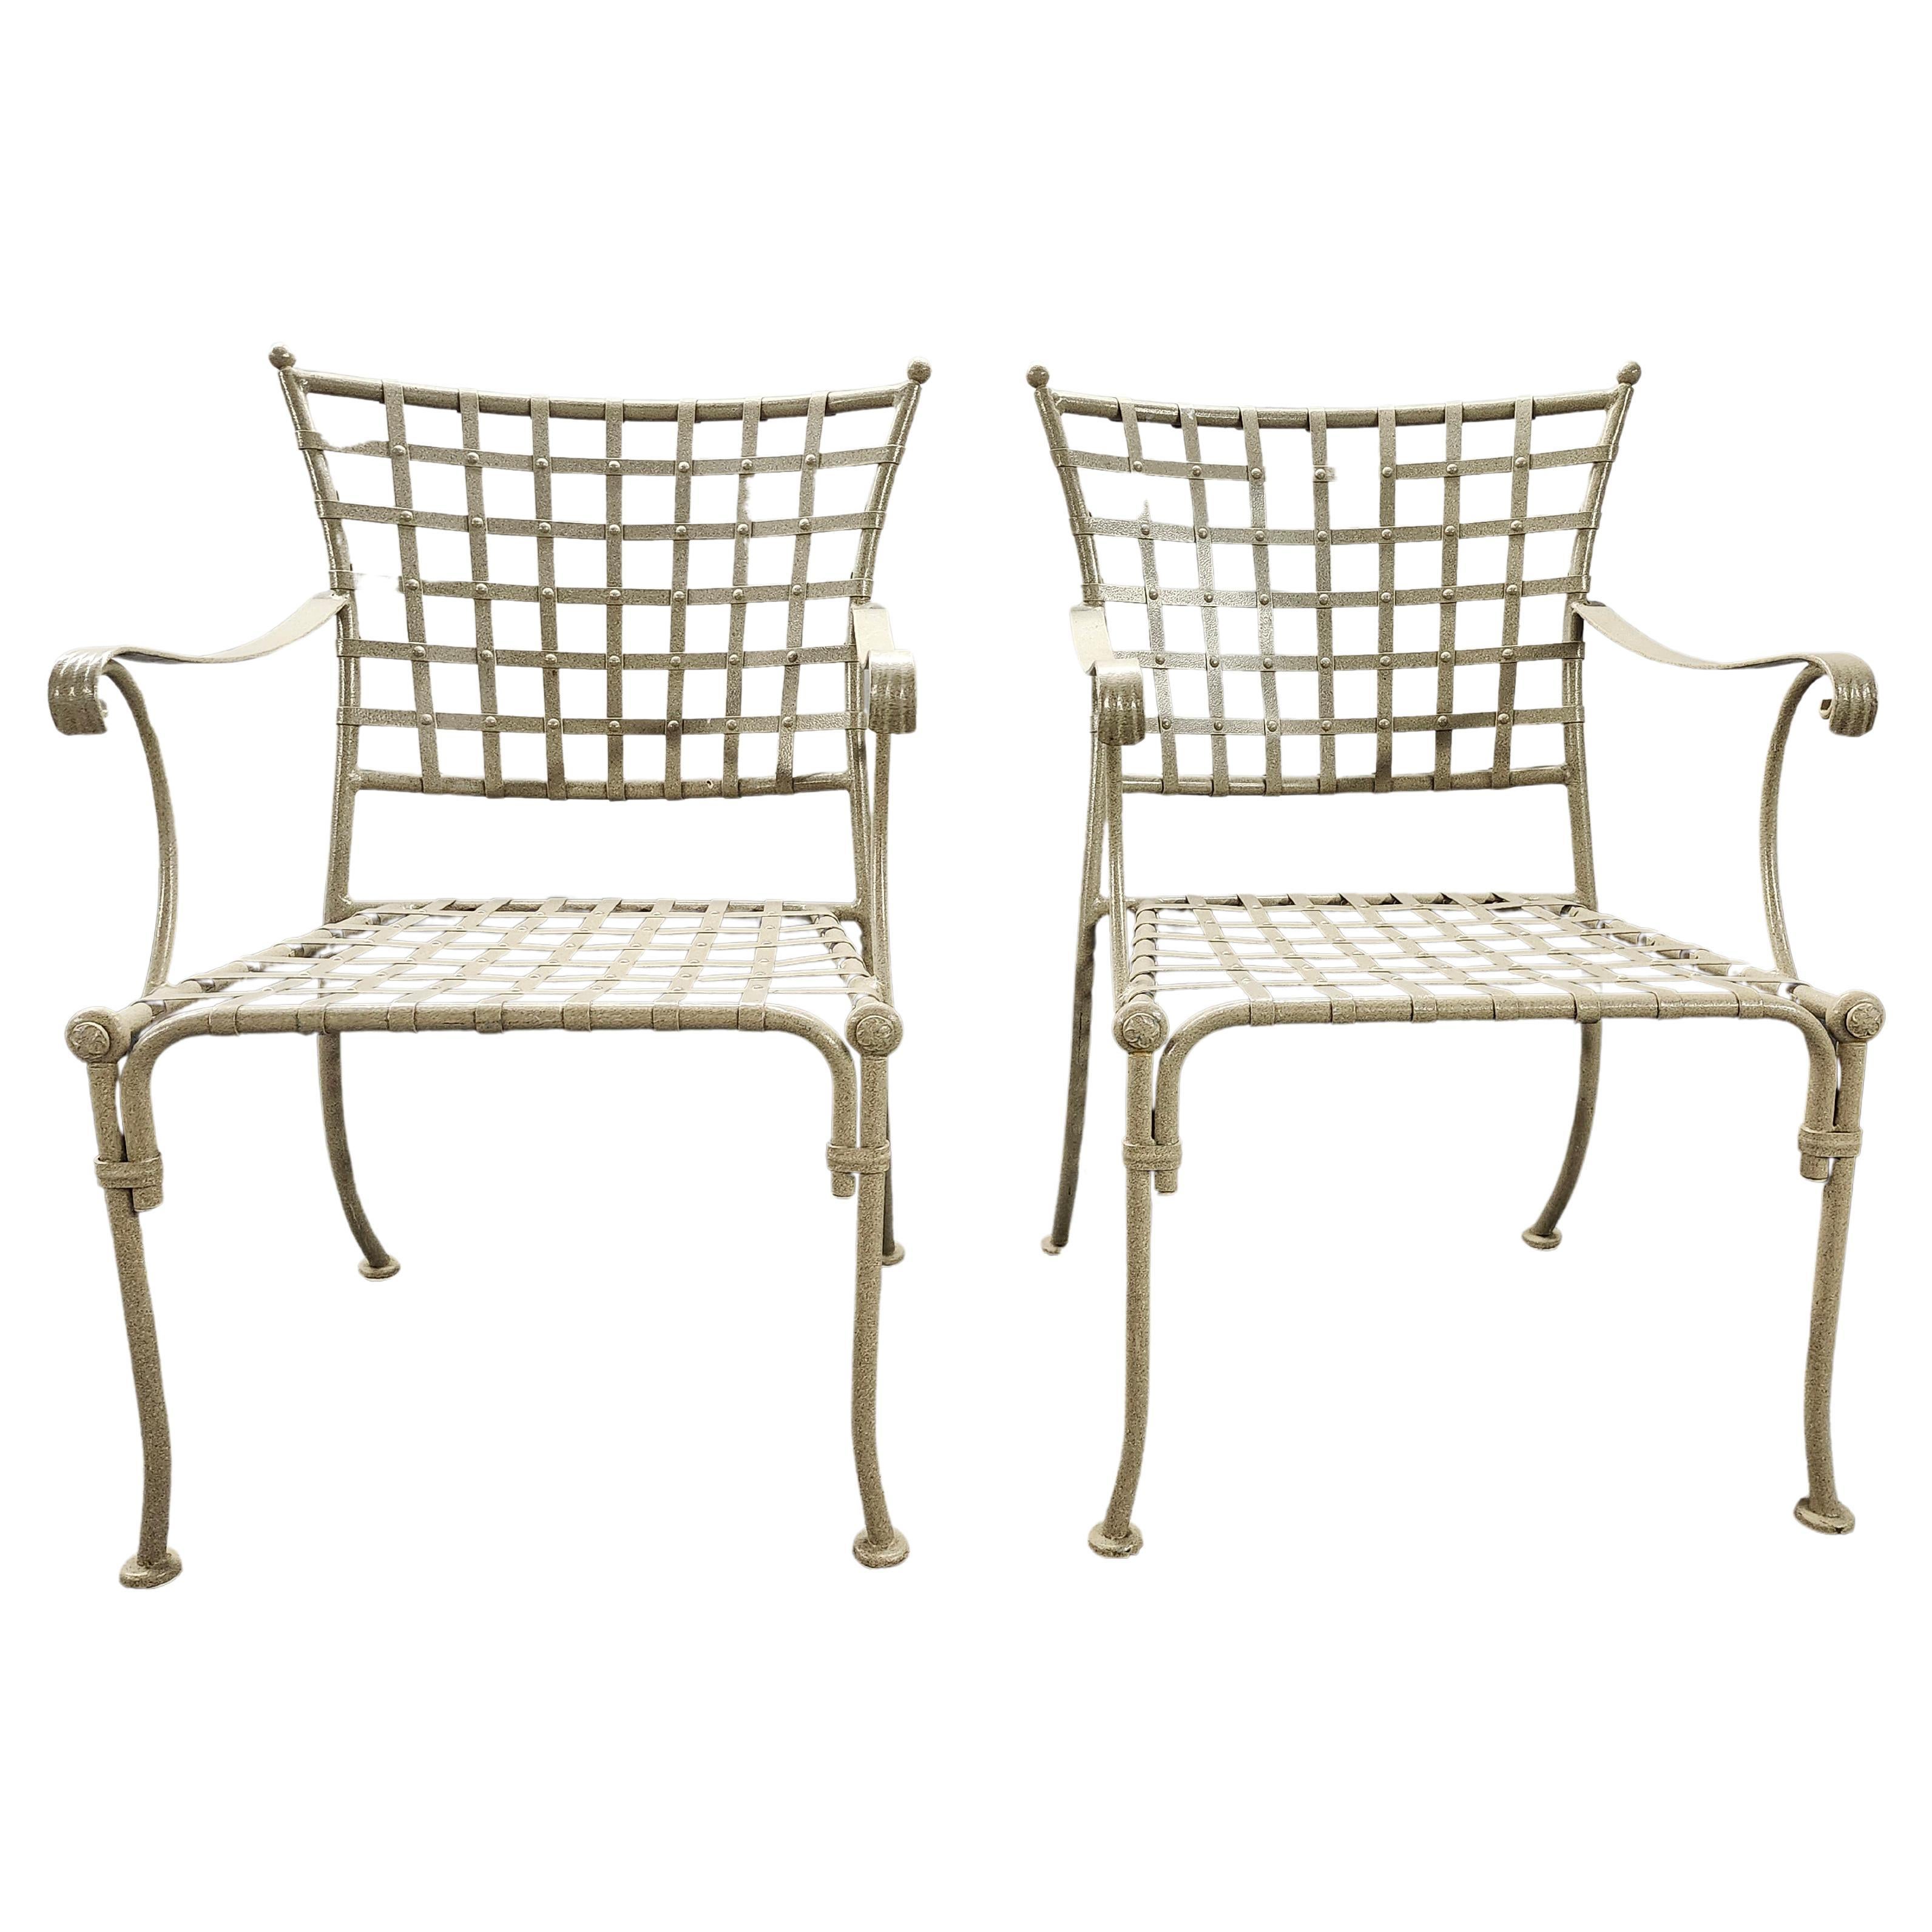 Vintage Wrought Iron Patio Outdoor Chairs For Sale